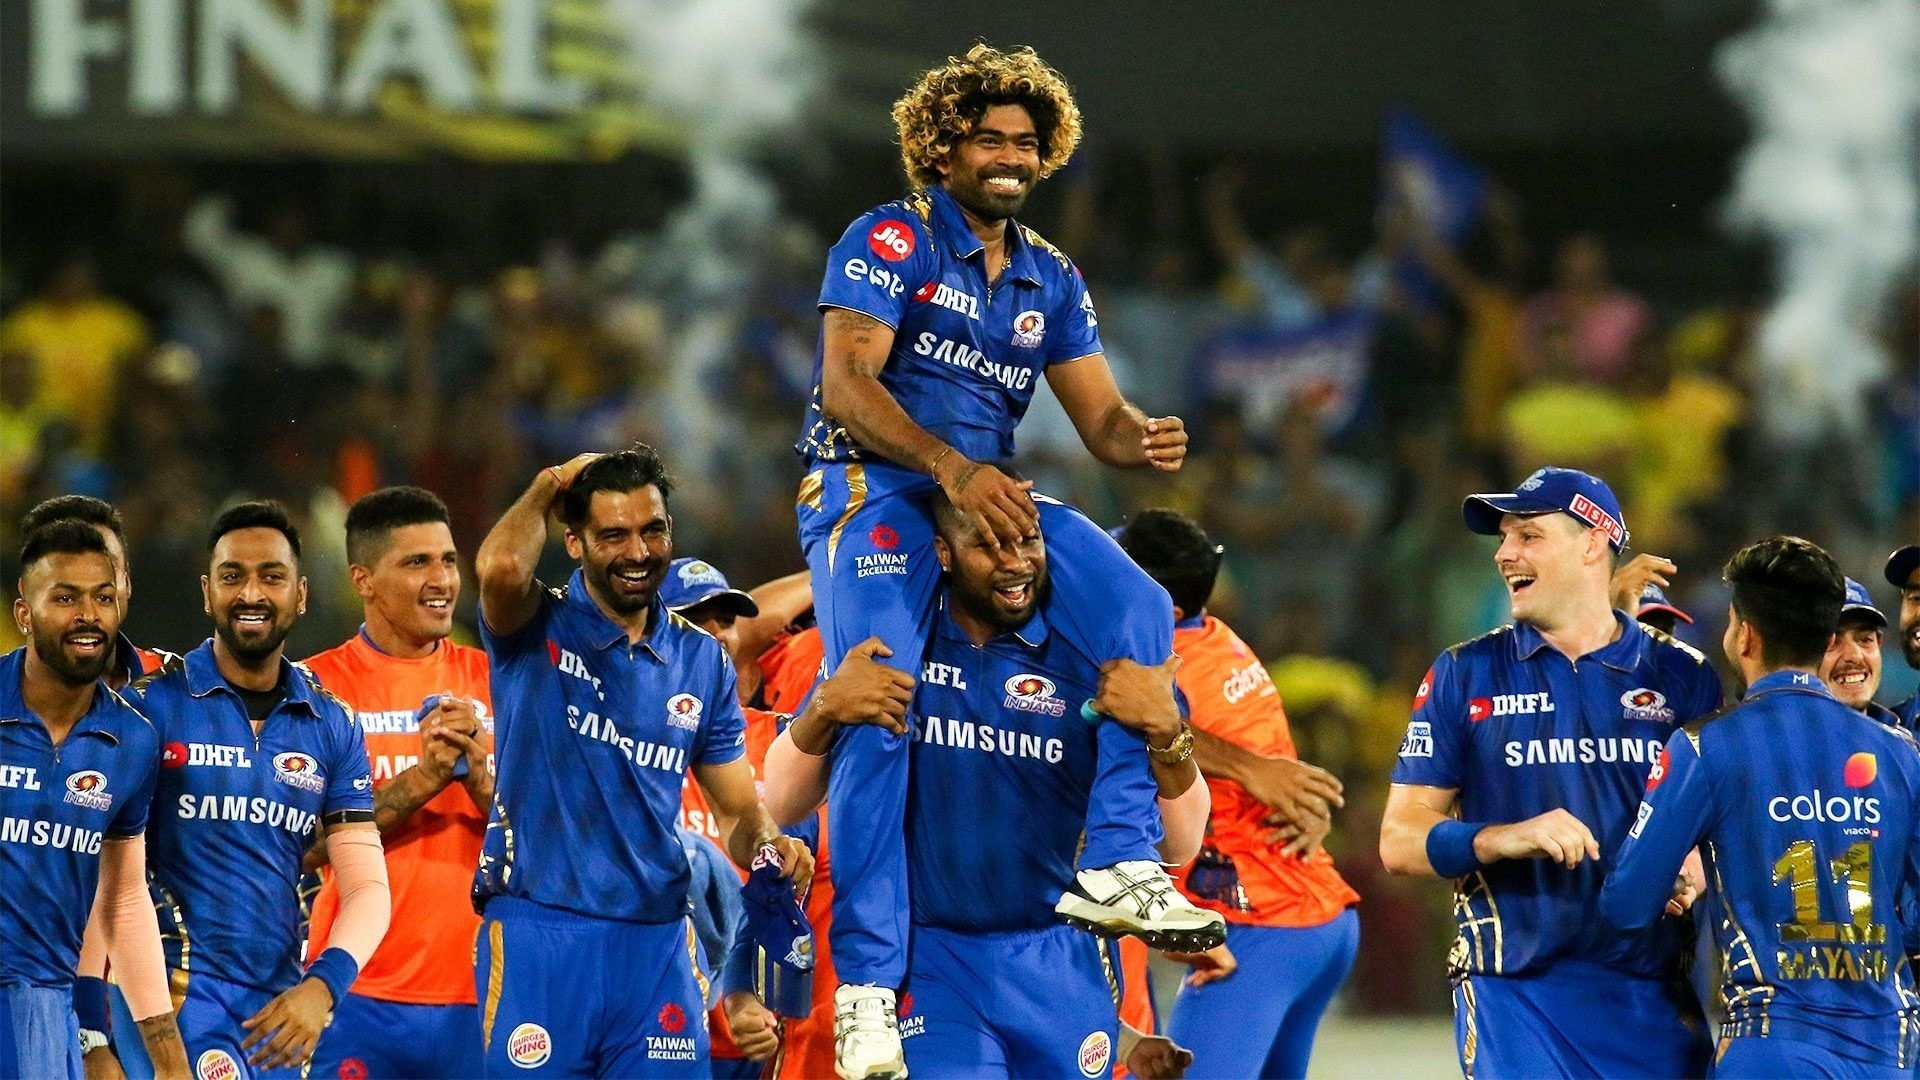 Malinga decides to retire from franchise cricket